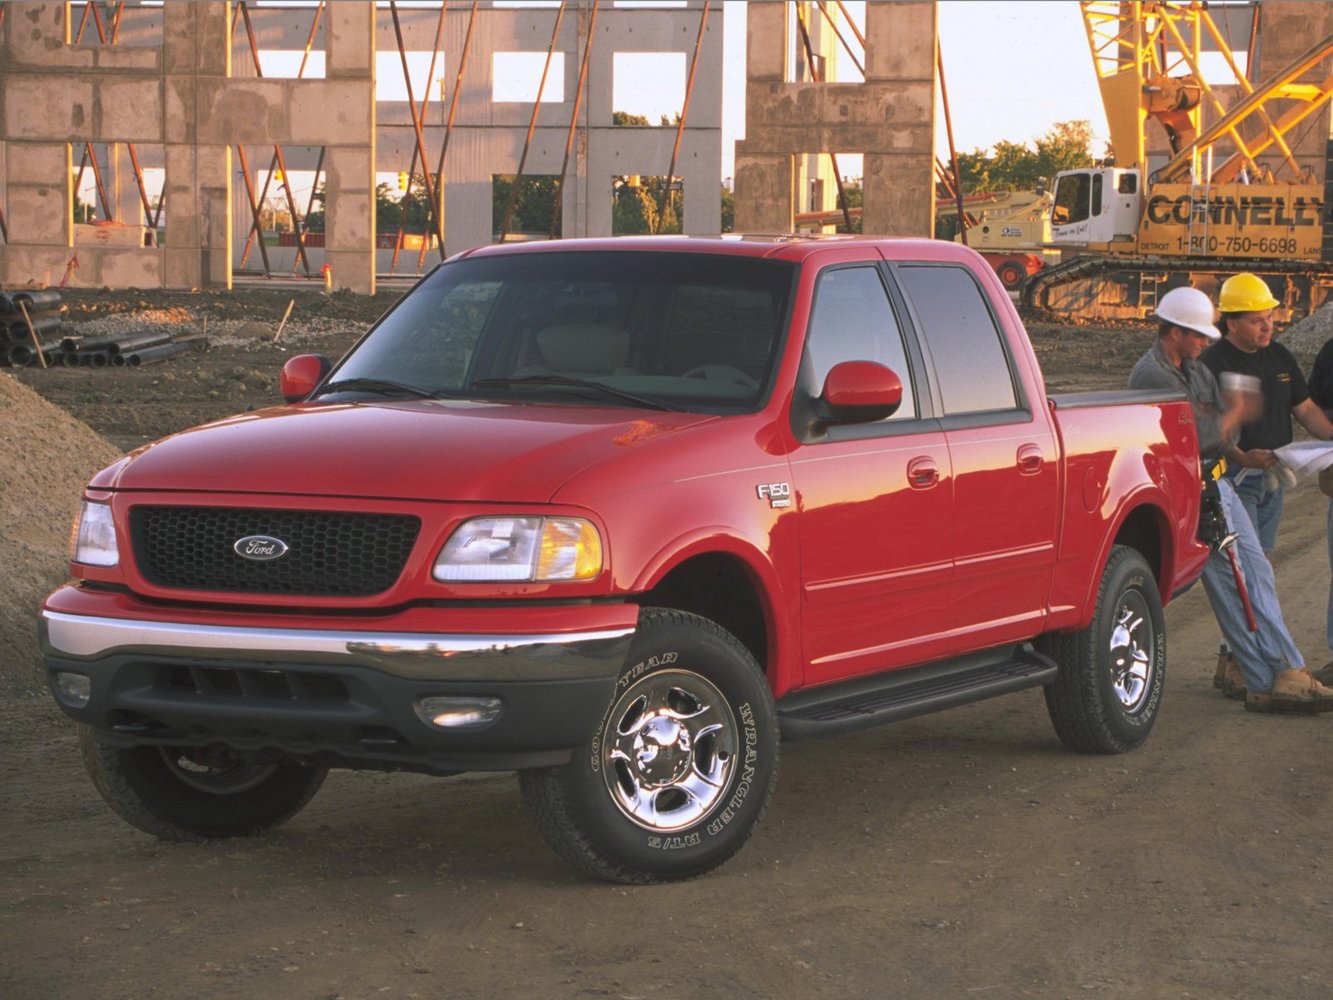 Ford F-150 1996 - 2004